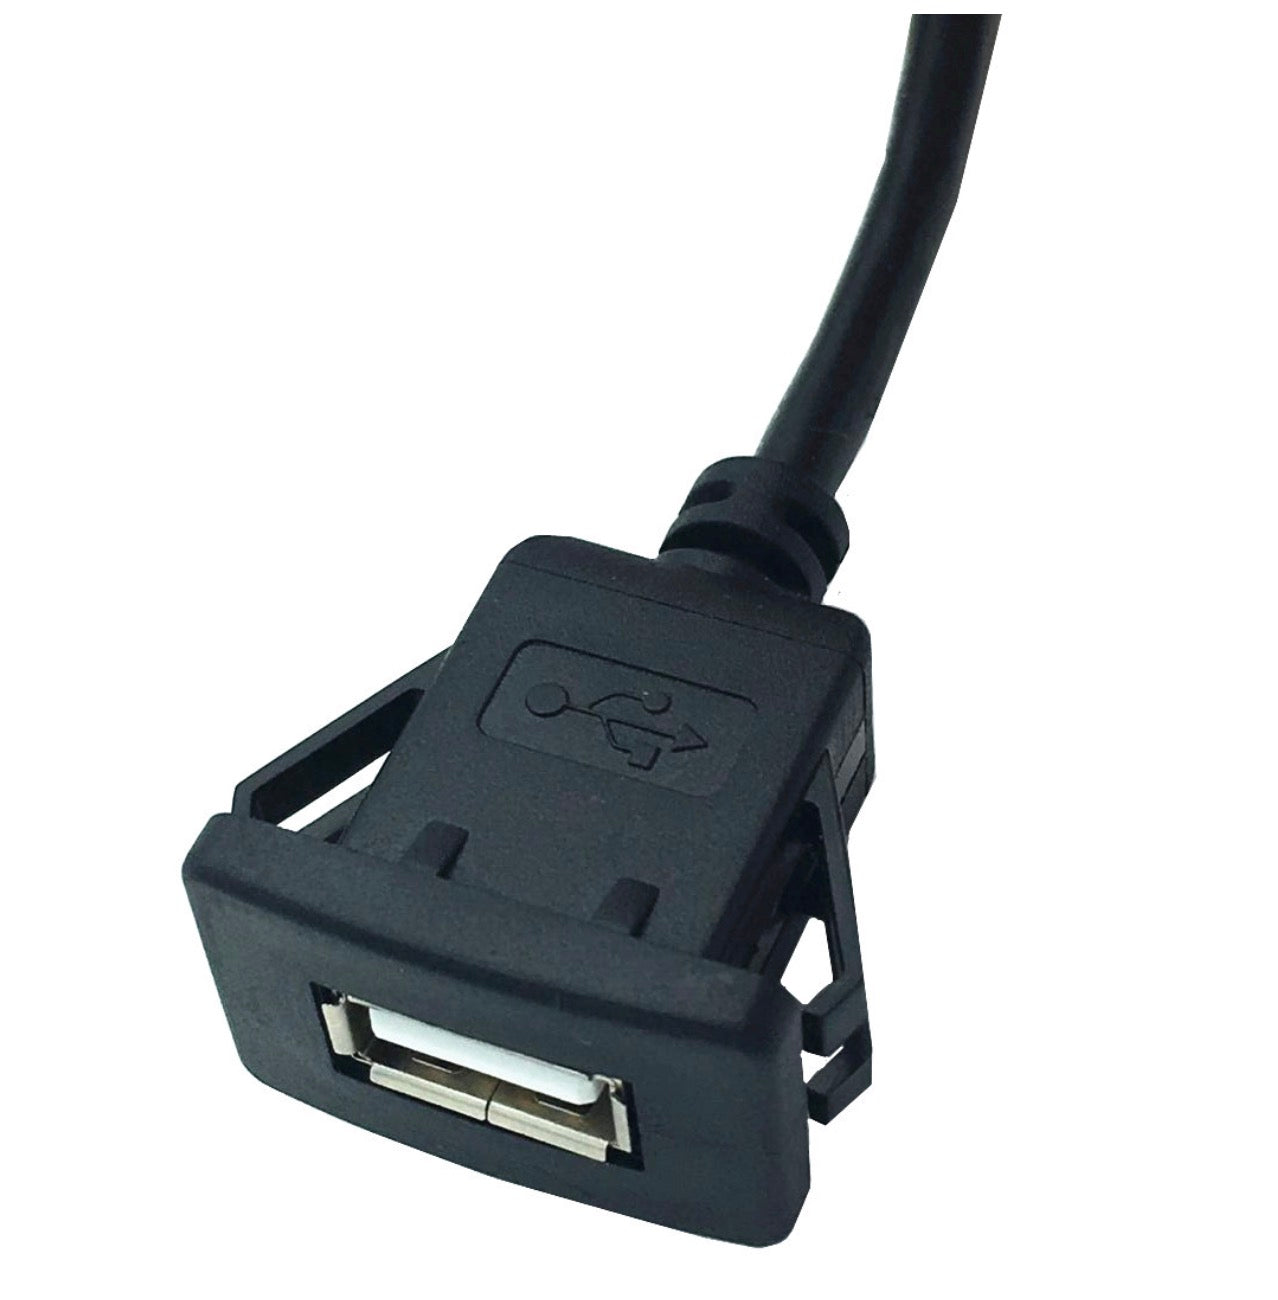 USB 2.0 Type A Male to Female Dash Mount Cable